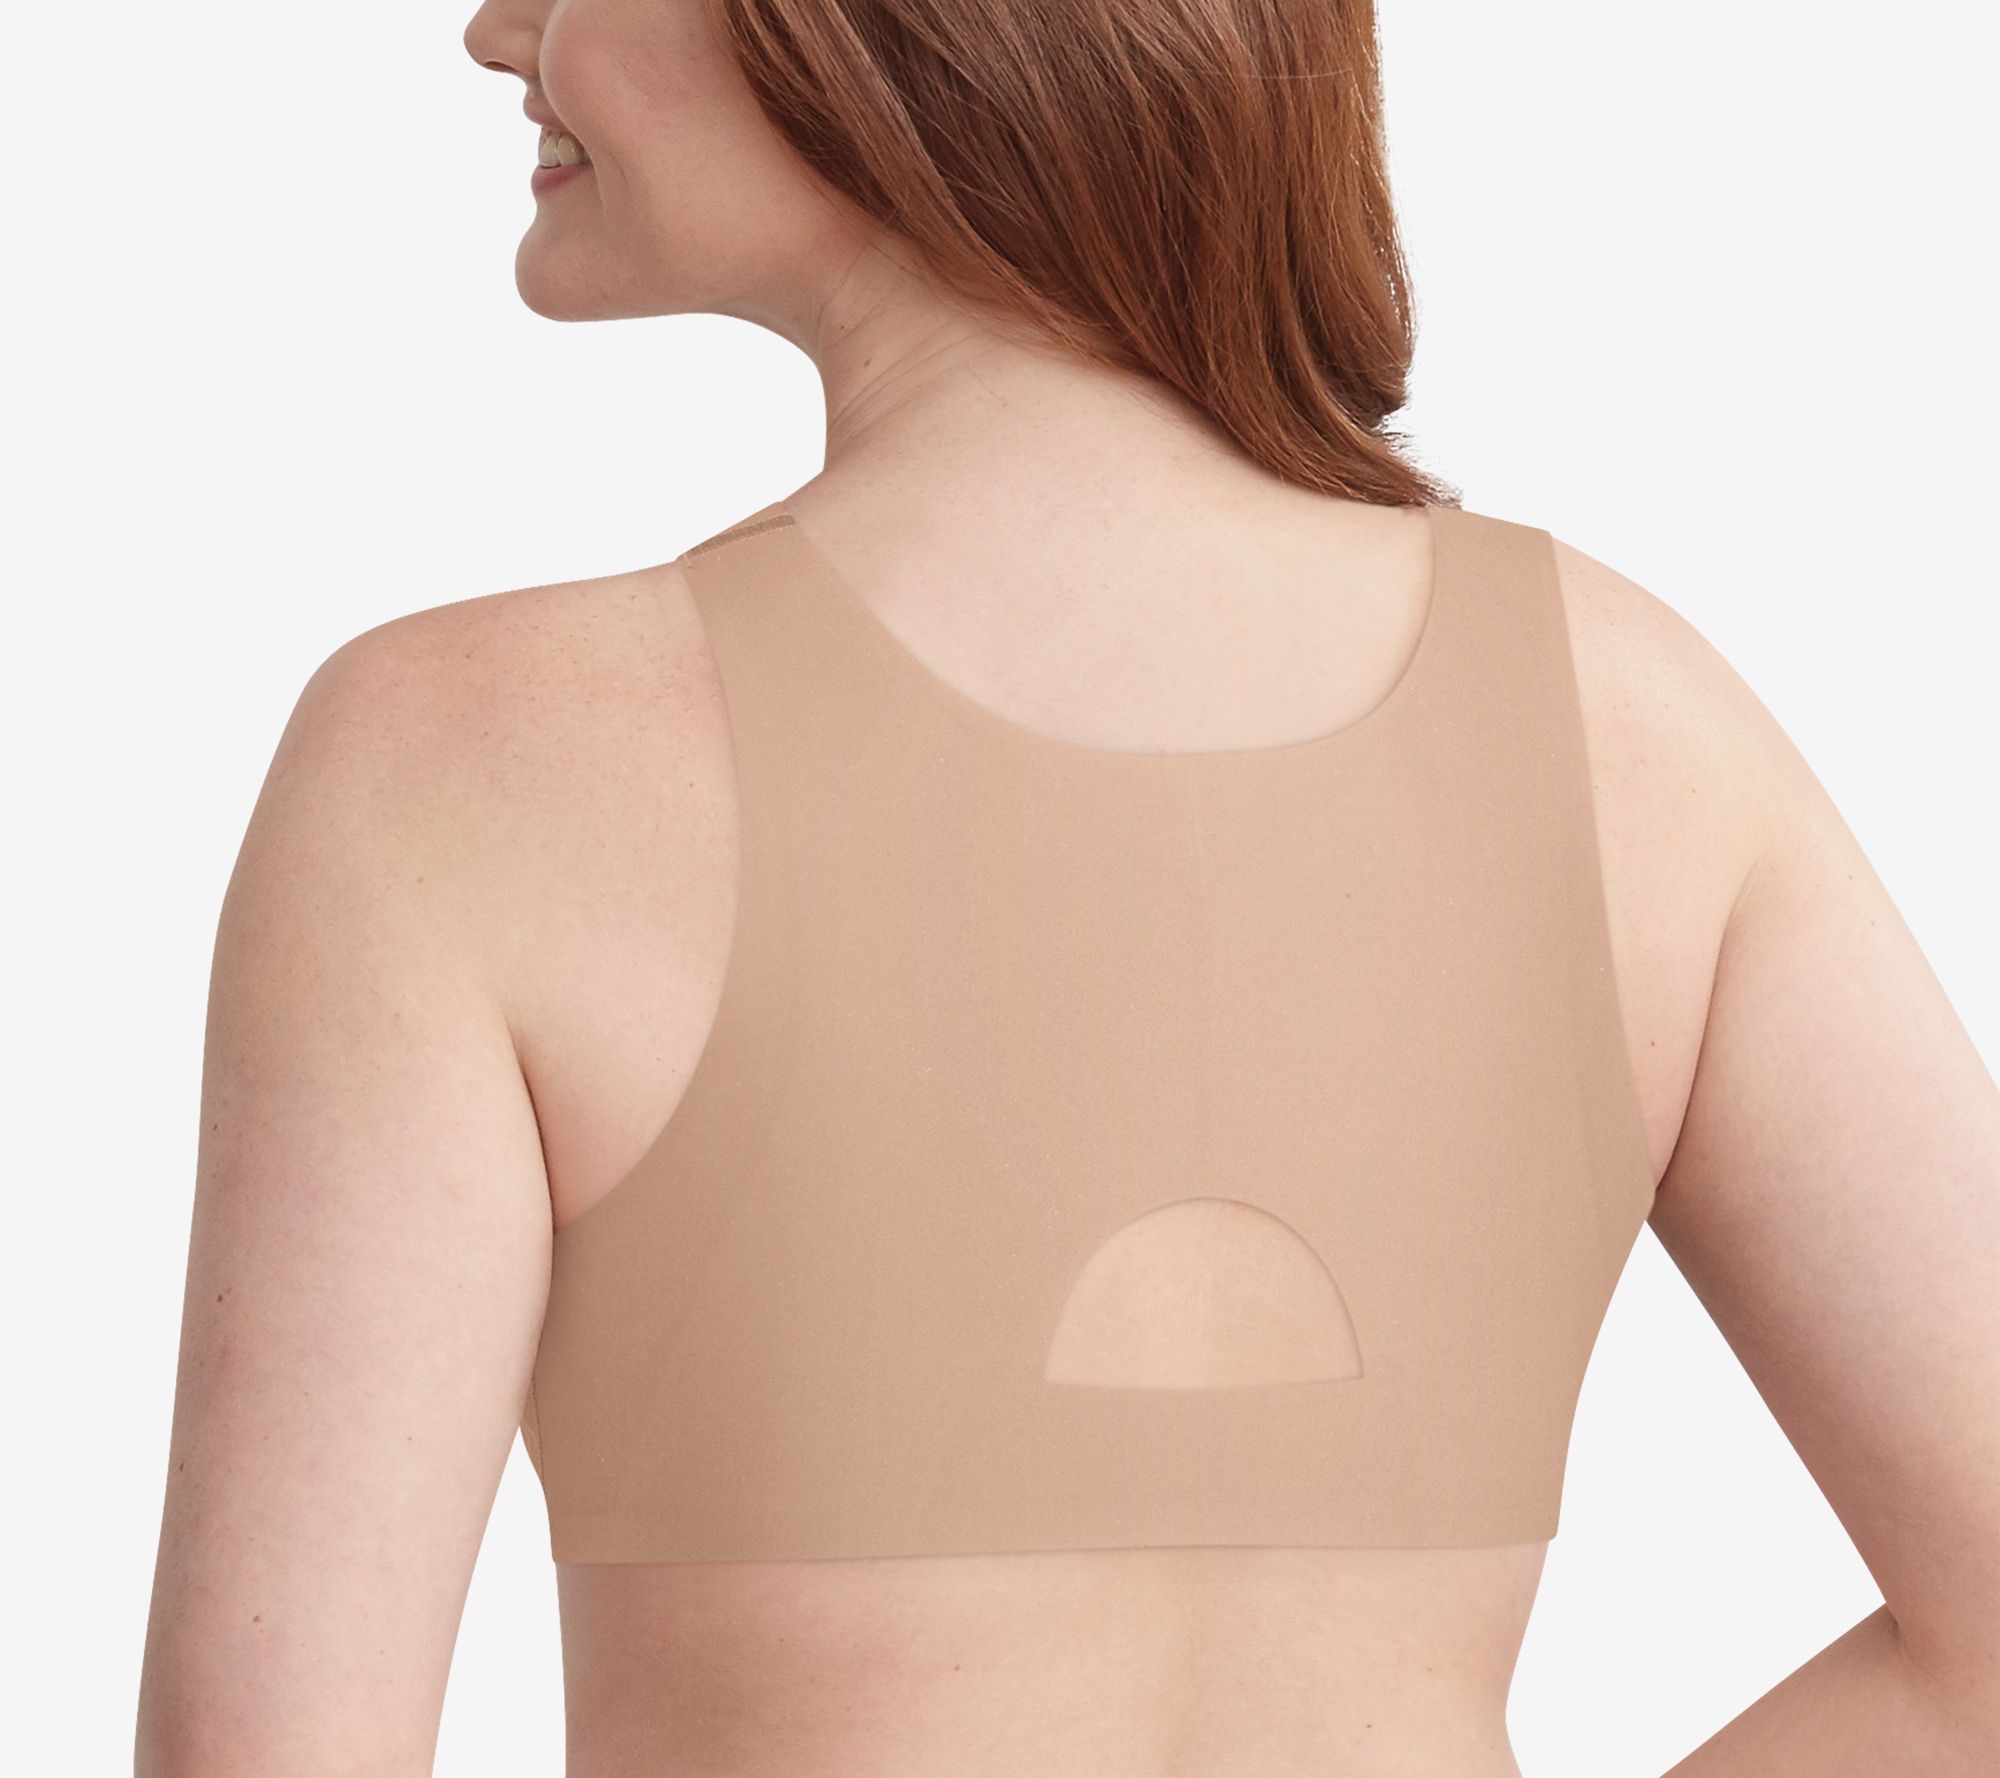 Multi/Functional Back Support Posture Corrector Wireless Bra